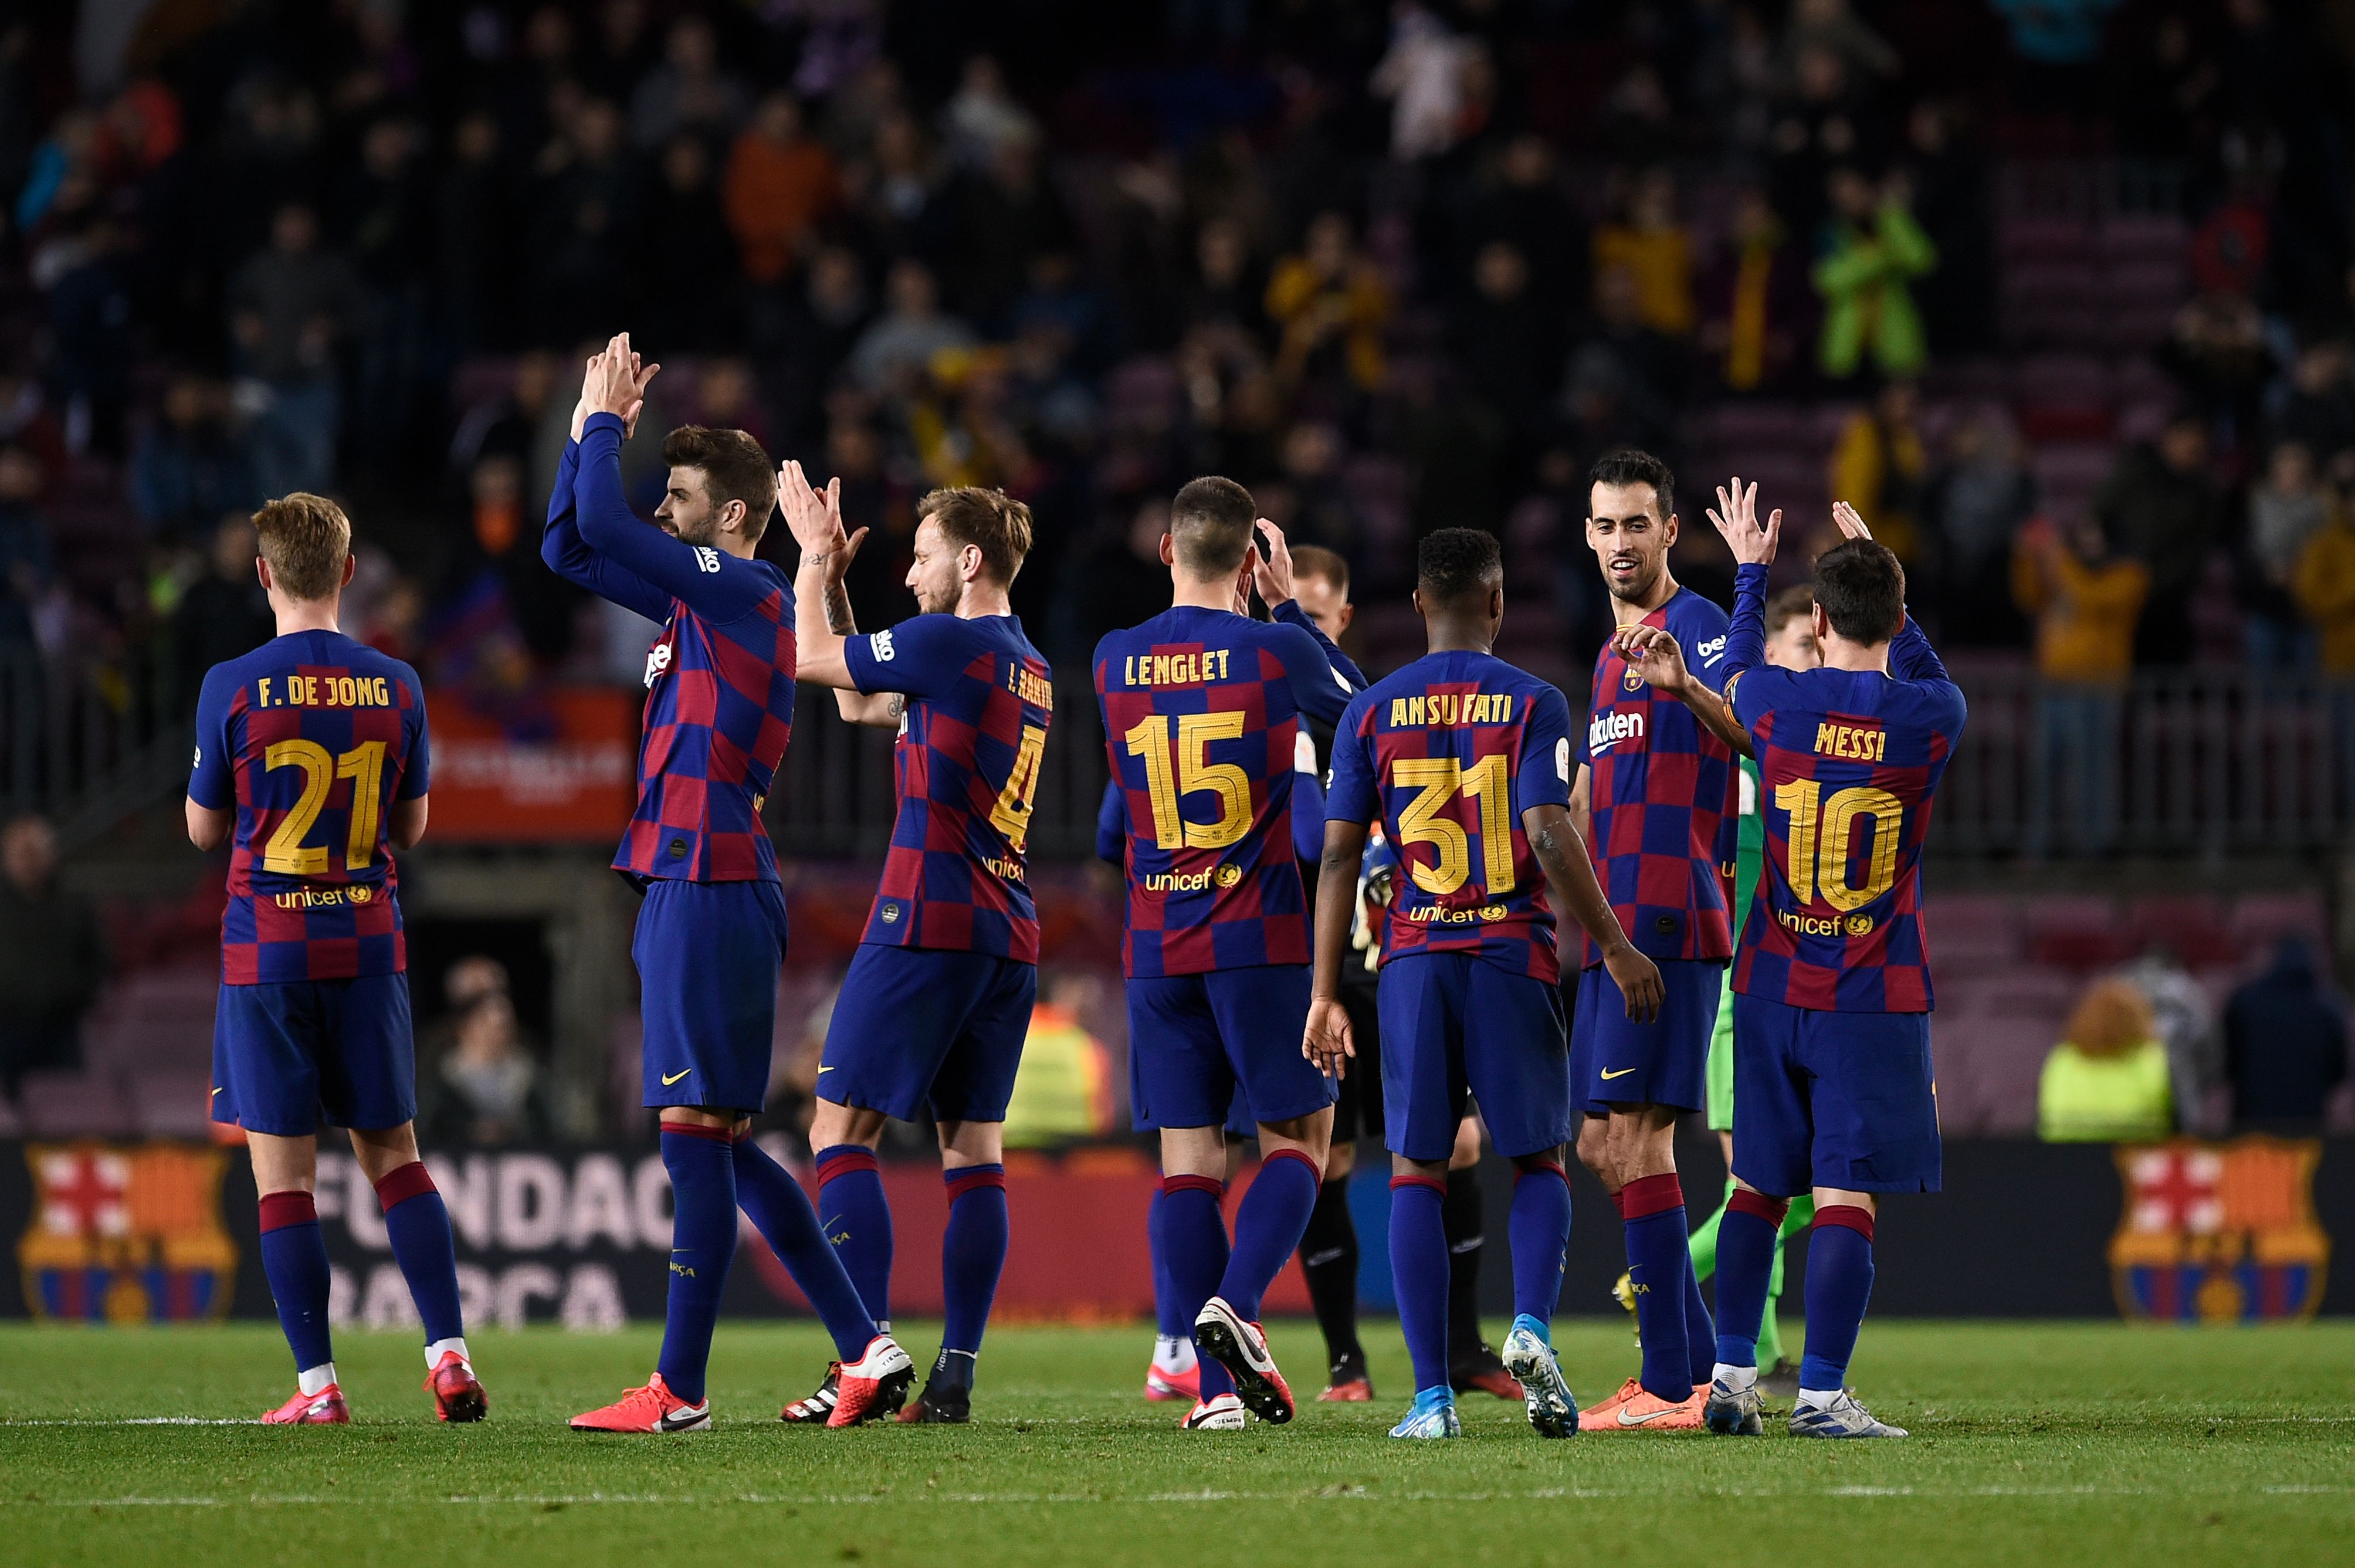 Barcelona players celebrate their win at the end of the Copa del Rey (King's Cup) football match between FC Barcelona and Club Deportivo Leganes SAD at the Camp Nou stadium in Barcelona, on January 30, 2020. (Photo by Josep LAGO / AFP) (Photo by JOSEP LAGO/AFP via Getty Images)